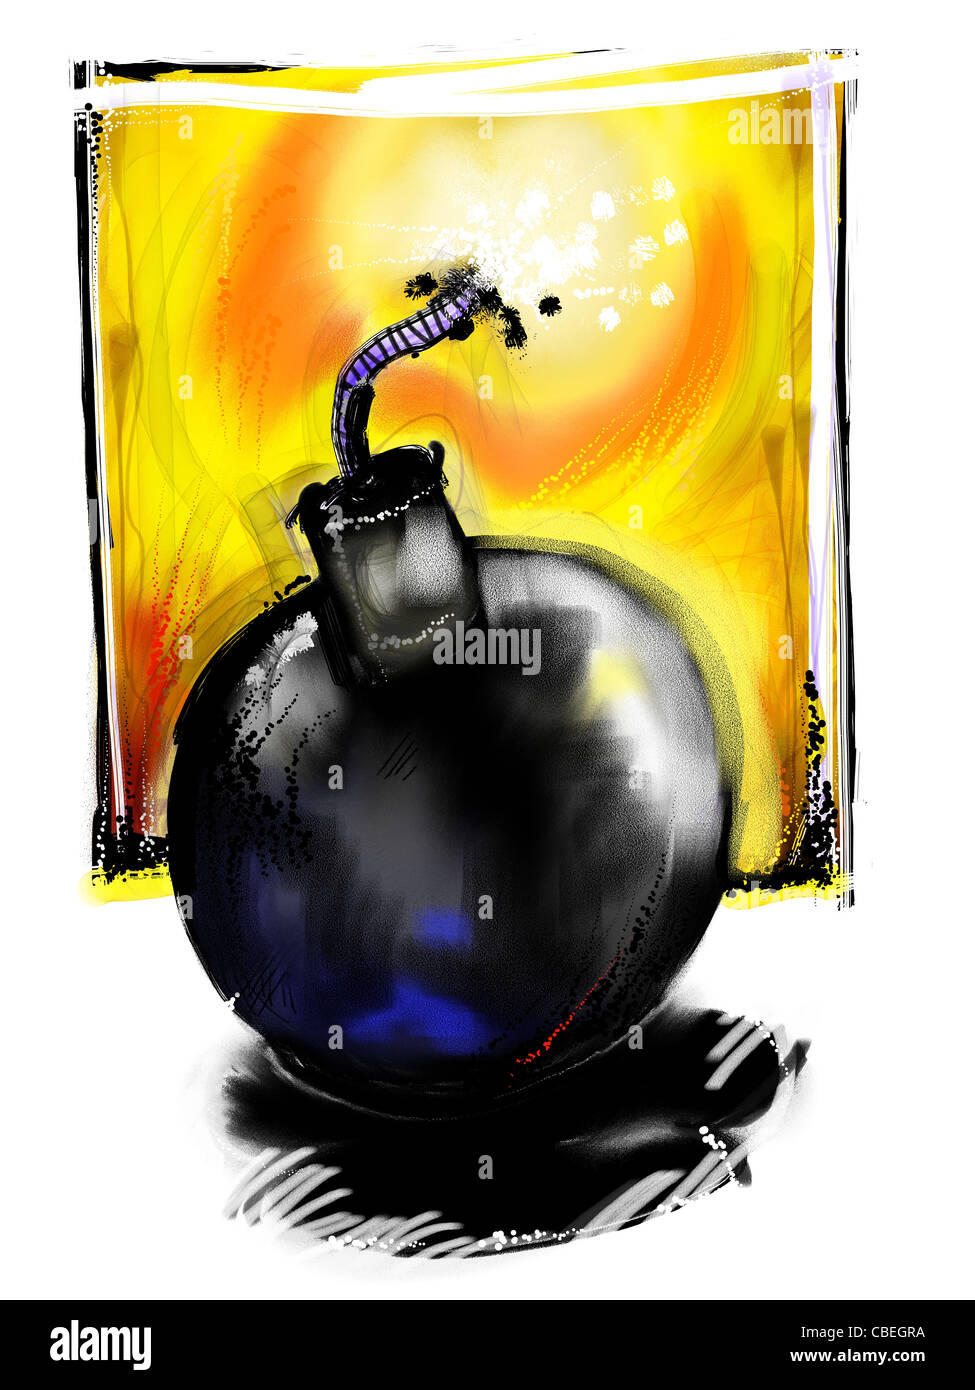 Illustration of an old fashioned  bomb Stock Photo